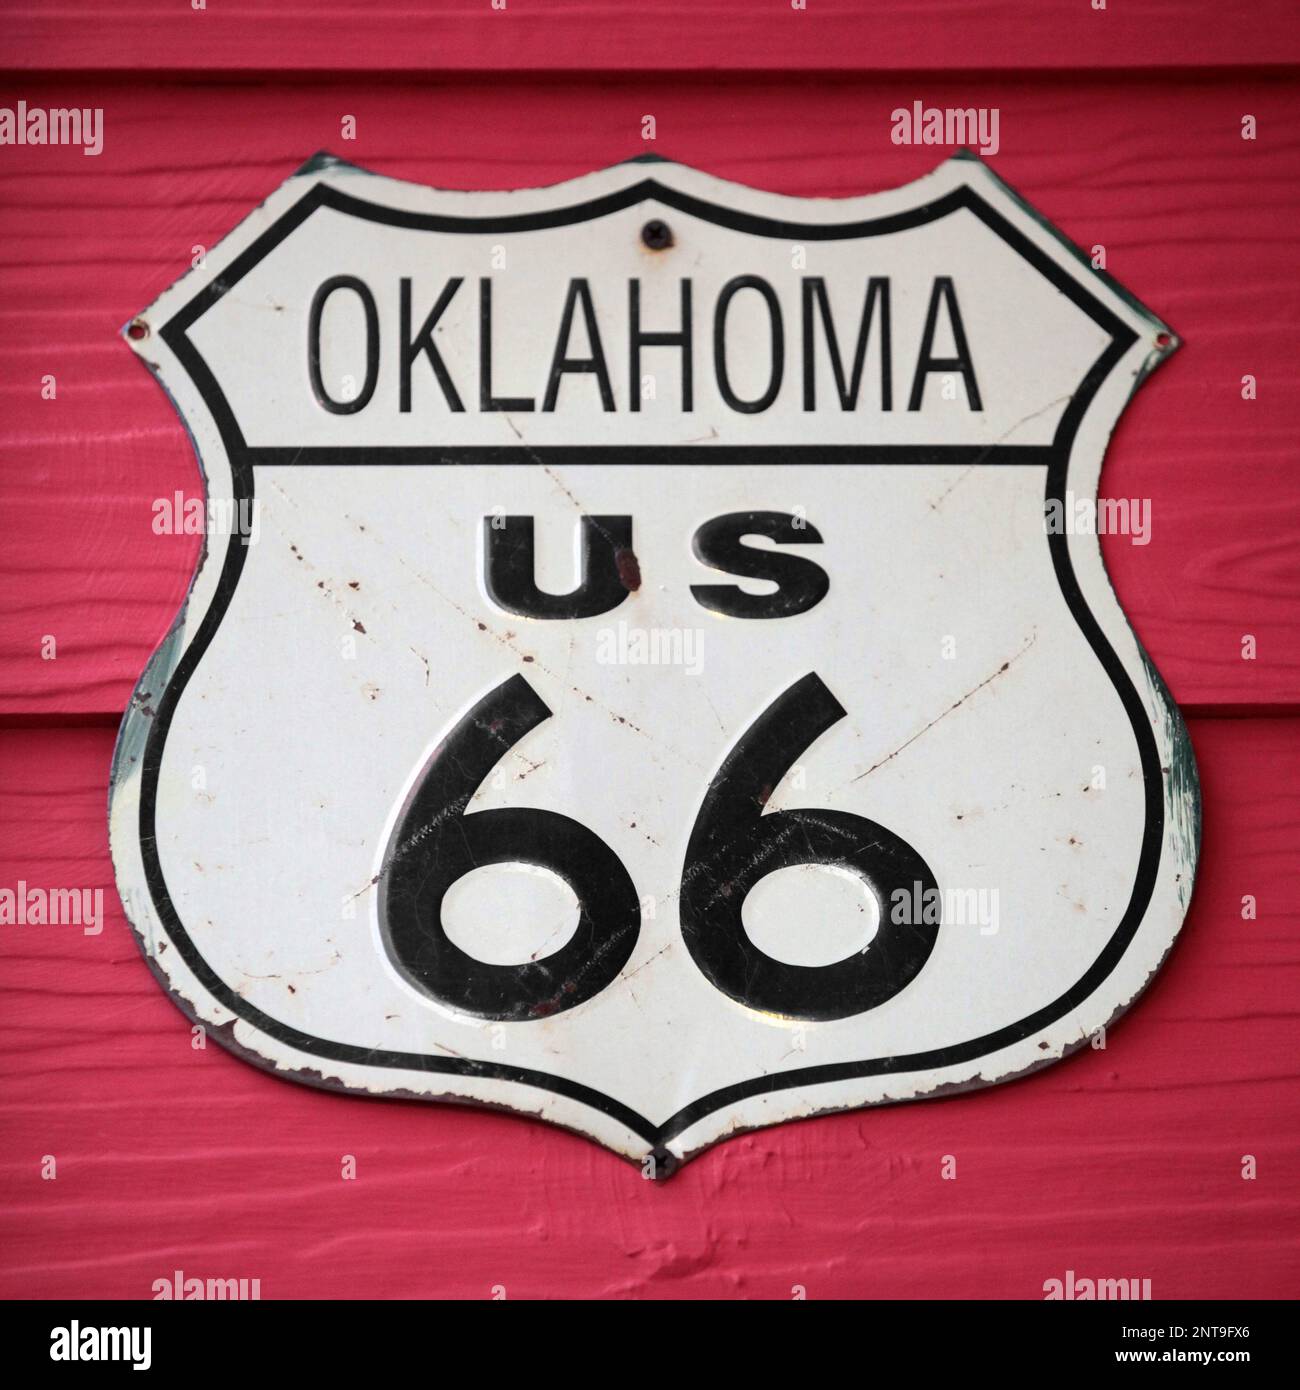 Close-up on an Oklahoma US 66 route sign screwed on a wooden wall painted in red. Stock Photo